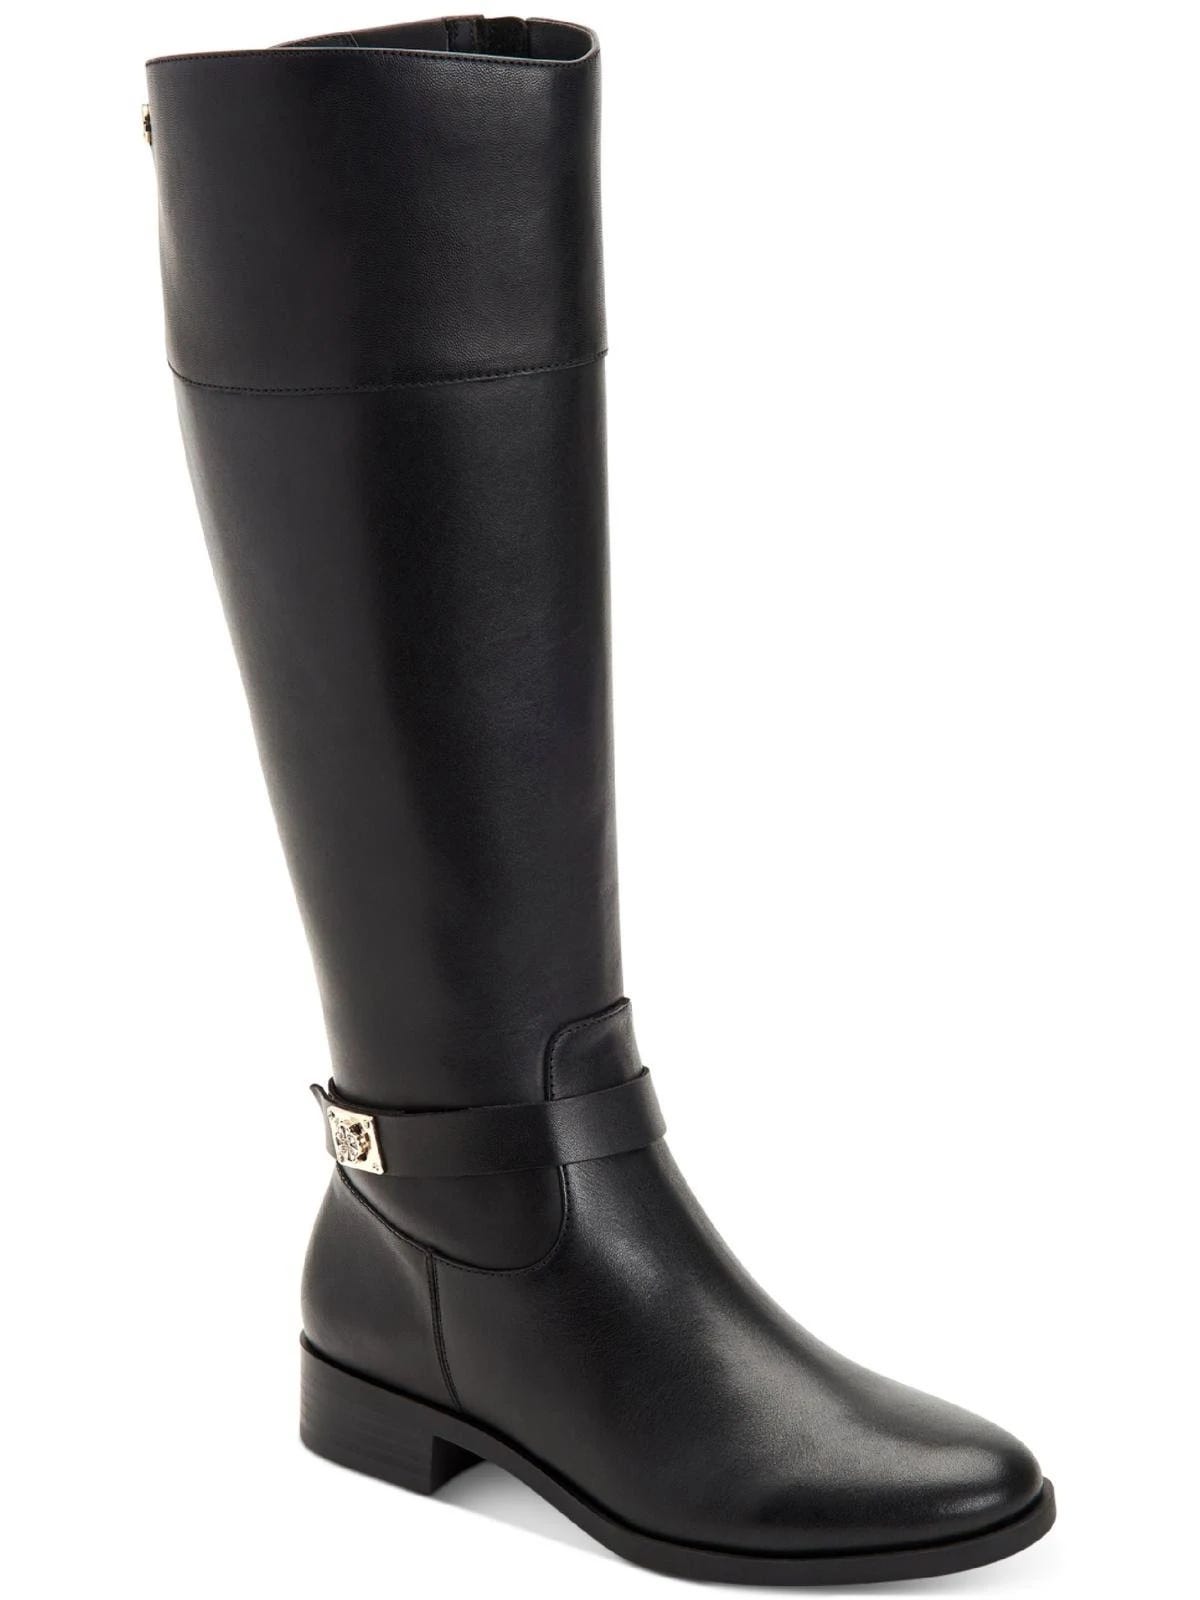 Sophisticated Knee-High Boots for Women | Image